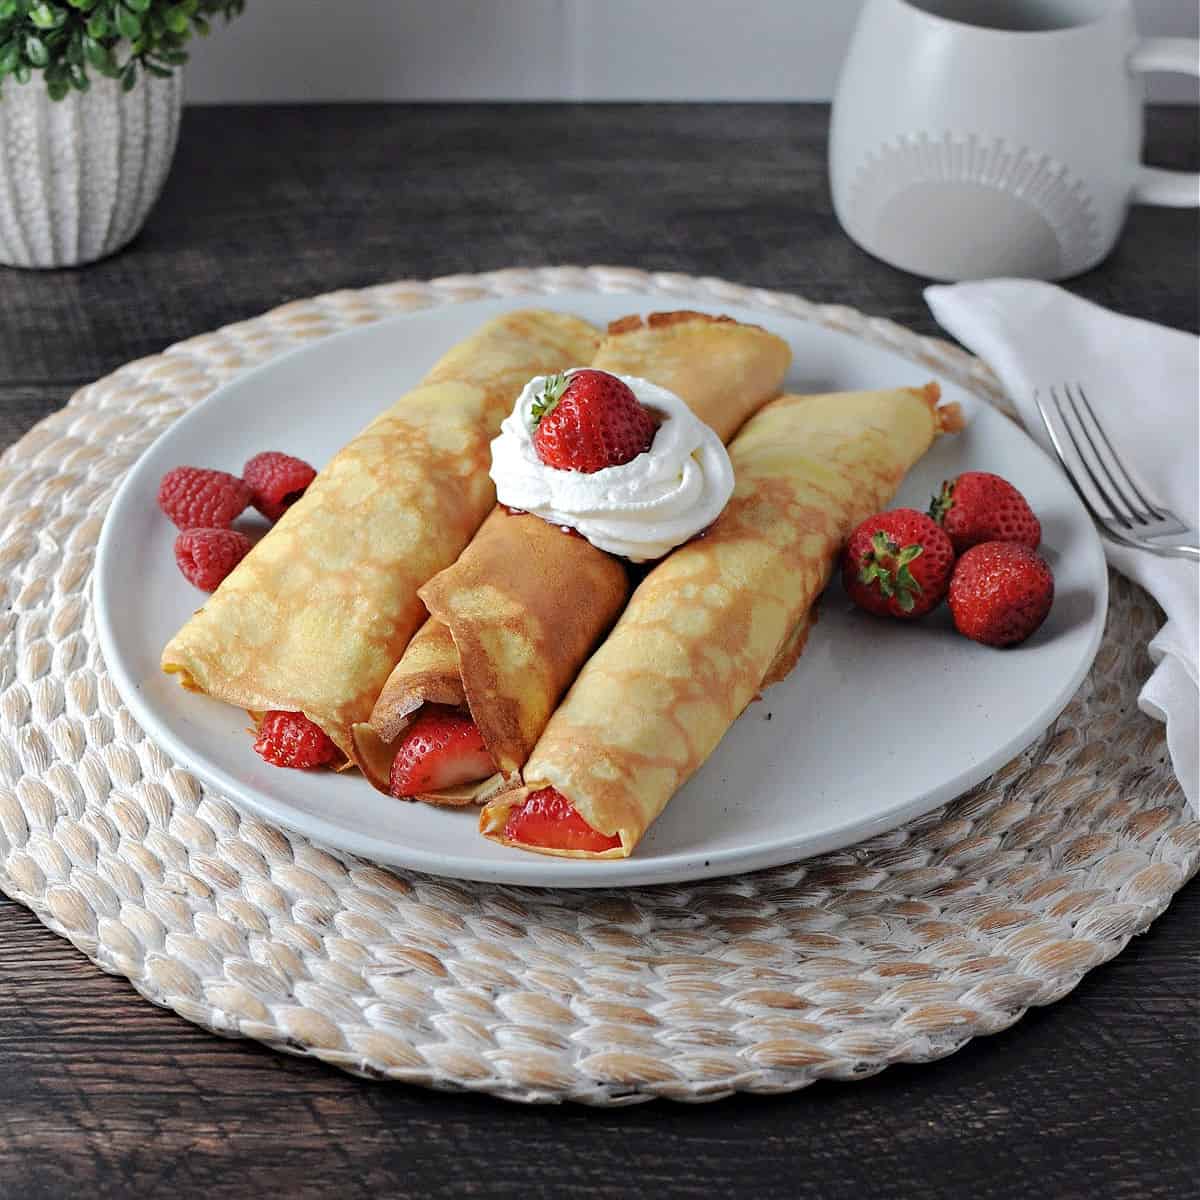 Fruit Crepes - Easy and Delicious! - Sula and Spice